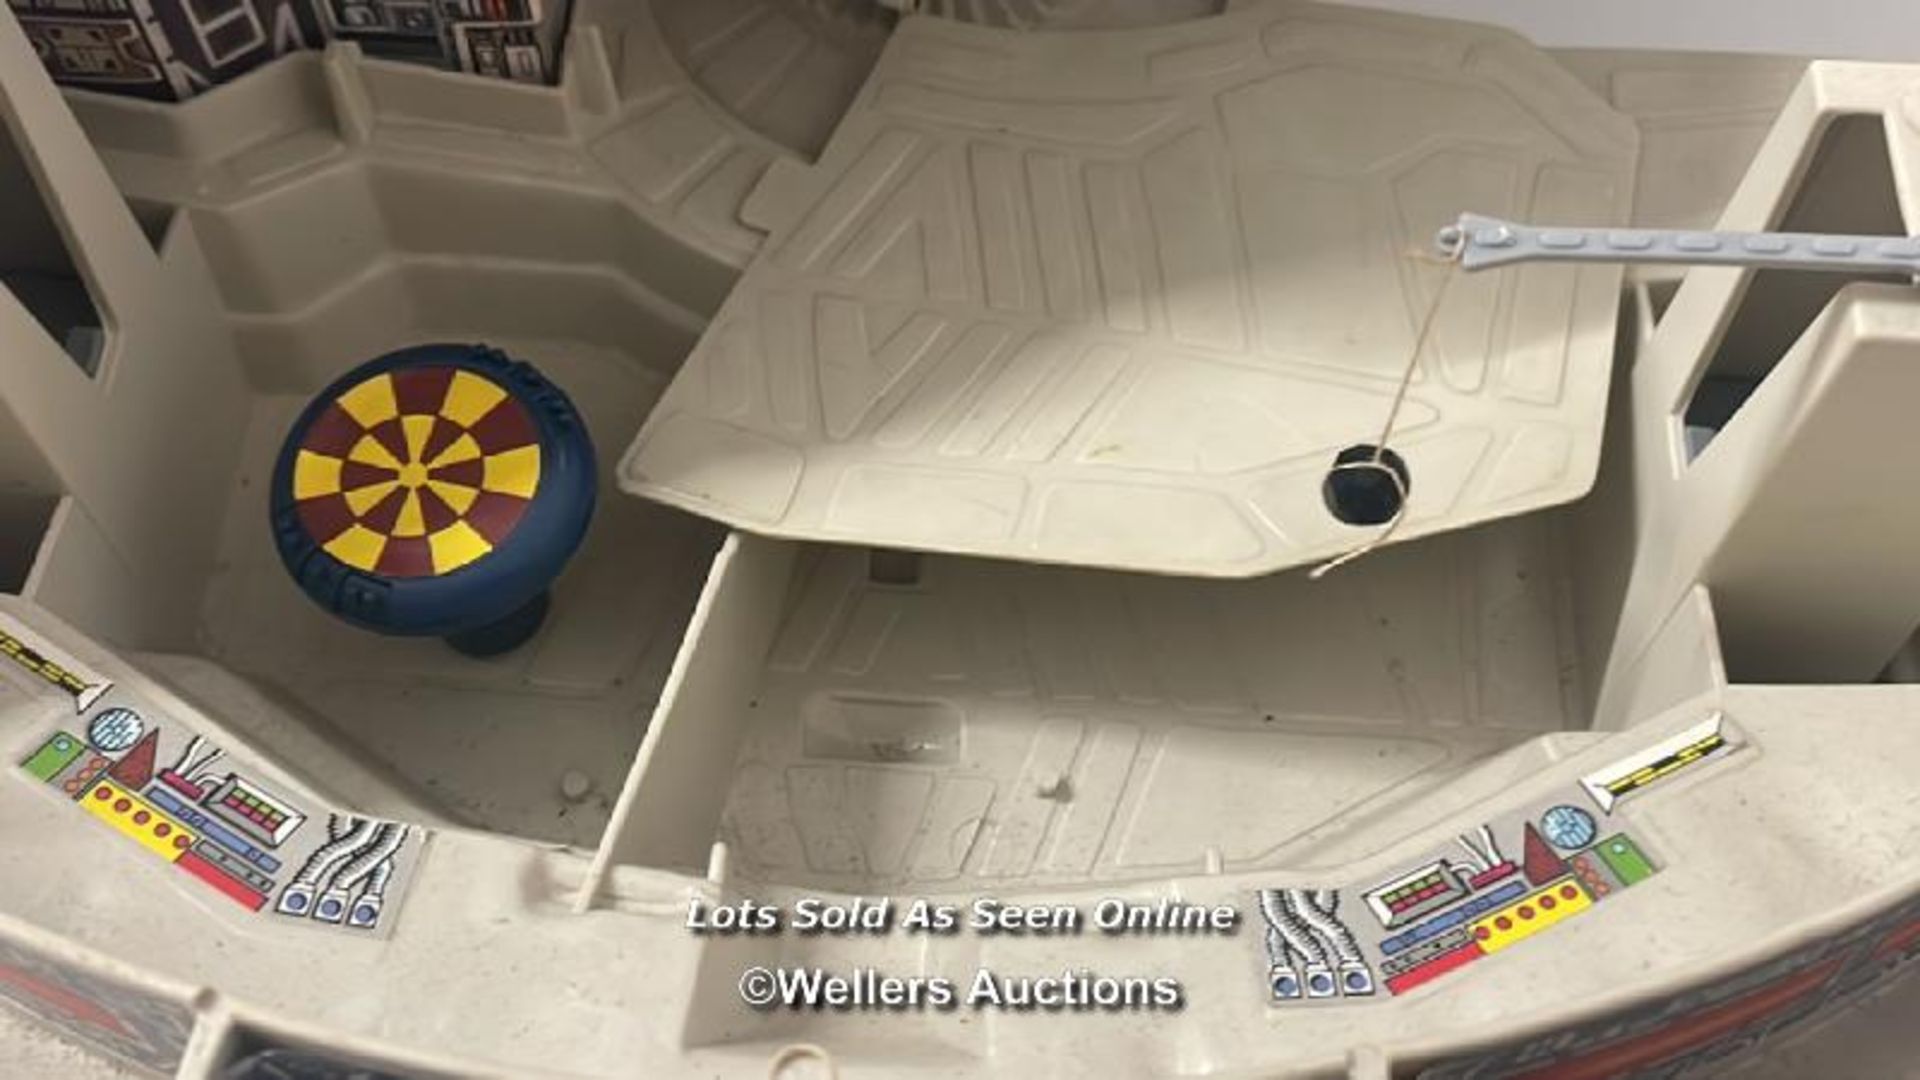 Palitoy vintage Return of the Jedi Millenium Falcon vehicle, with original training ball and floor - Image 6 of 11